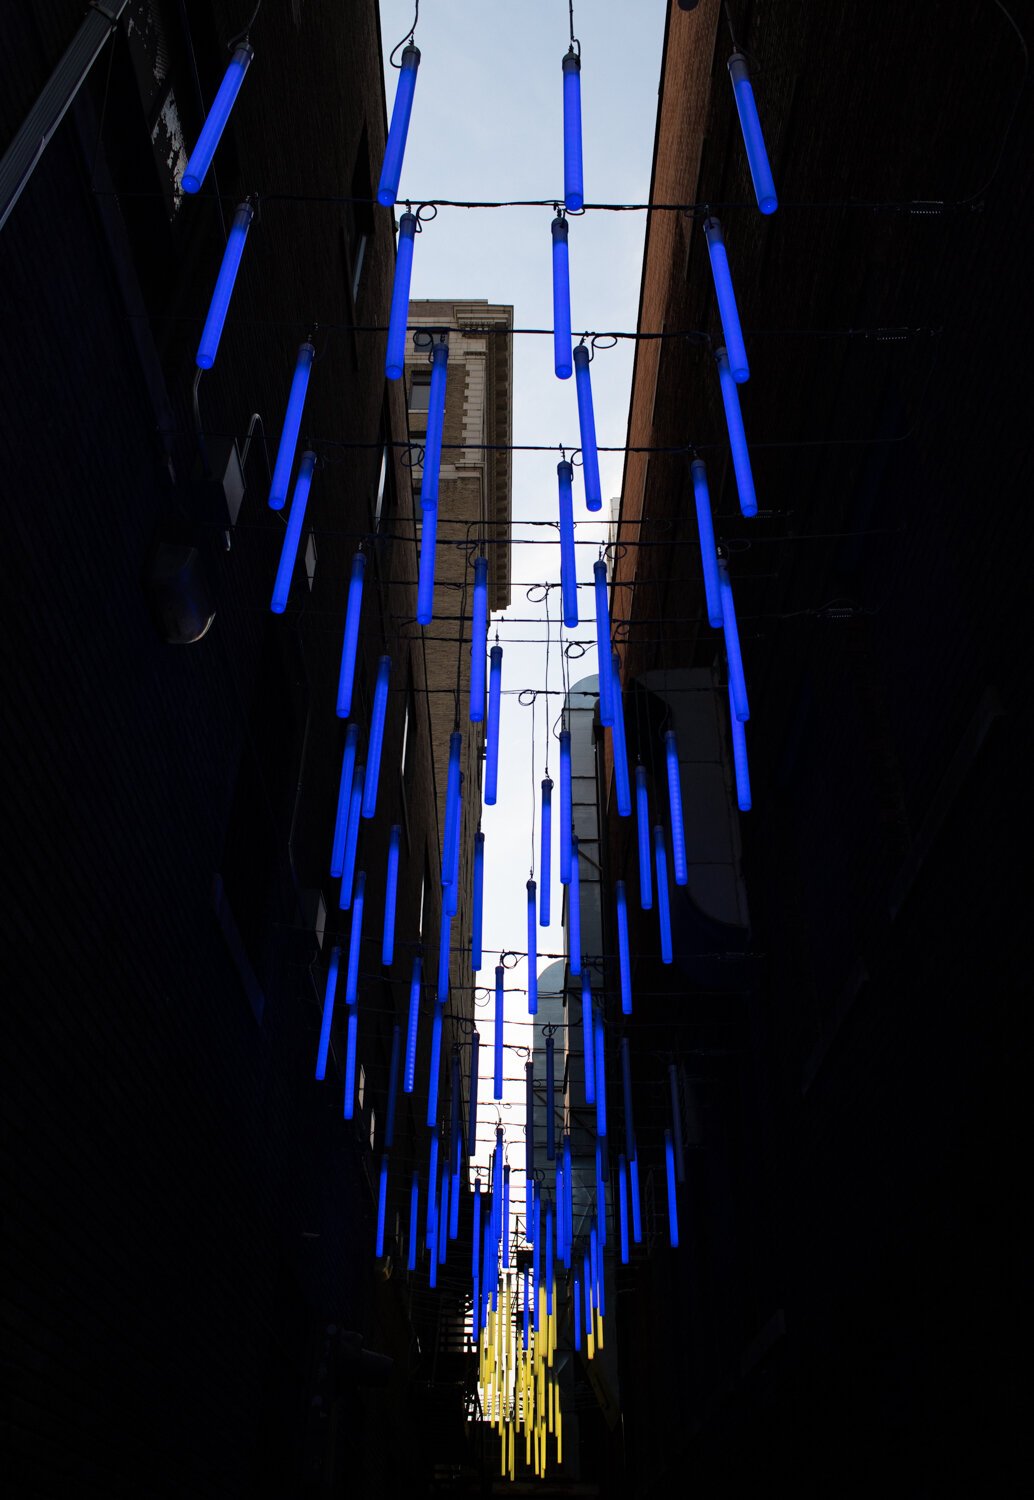 A light sculpture called 77 Steps in the alley between 113 and 127 W. Berry St.